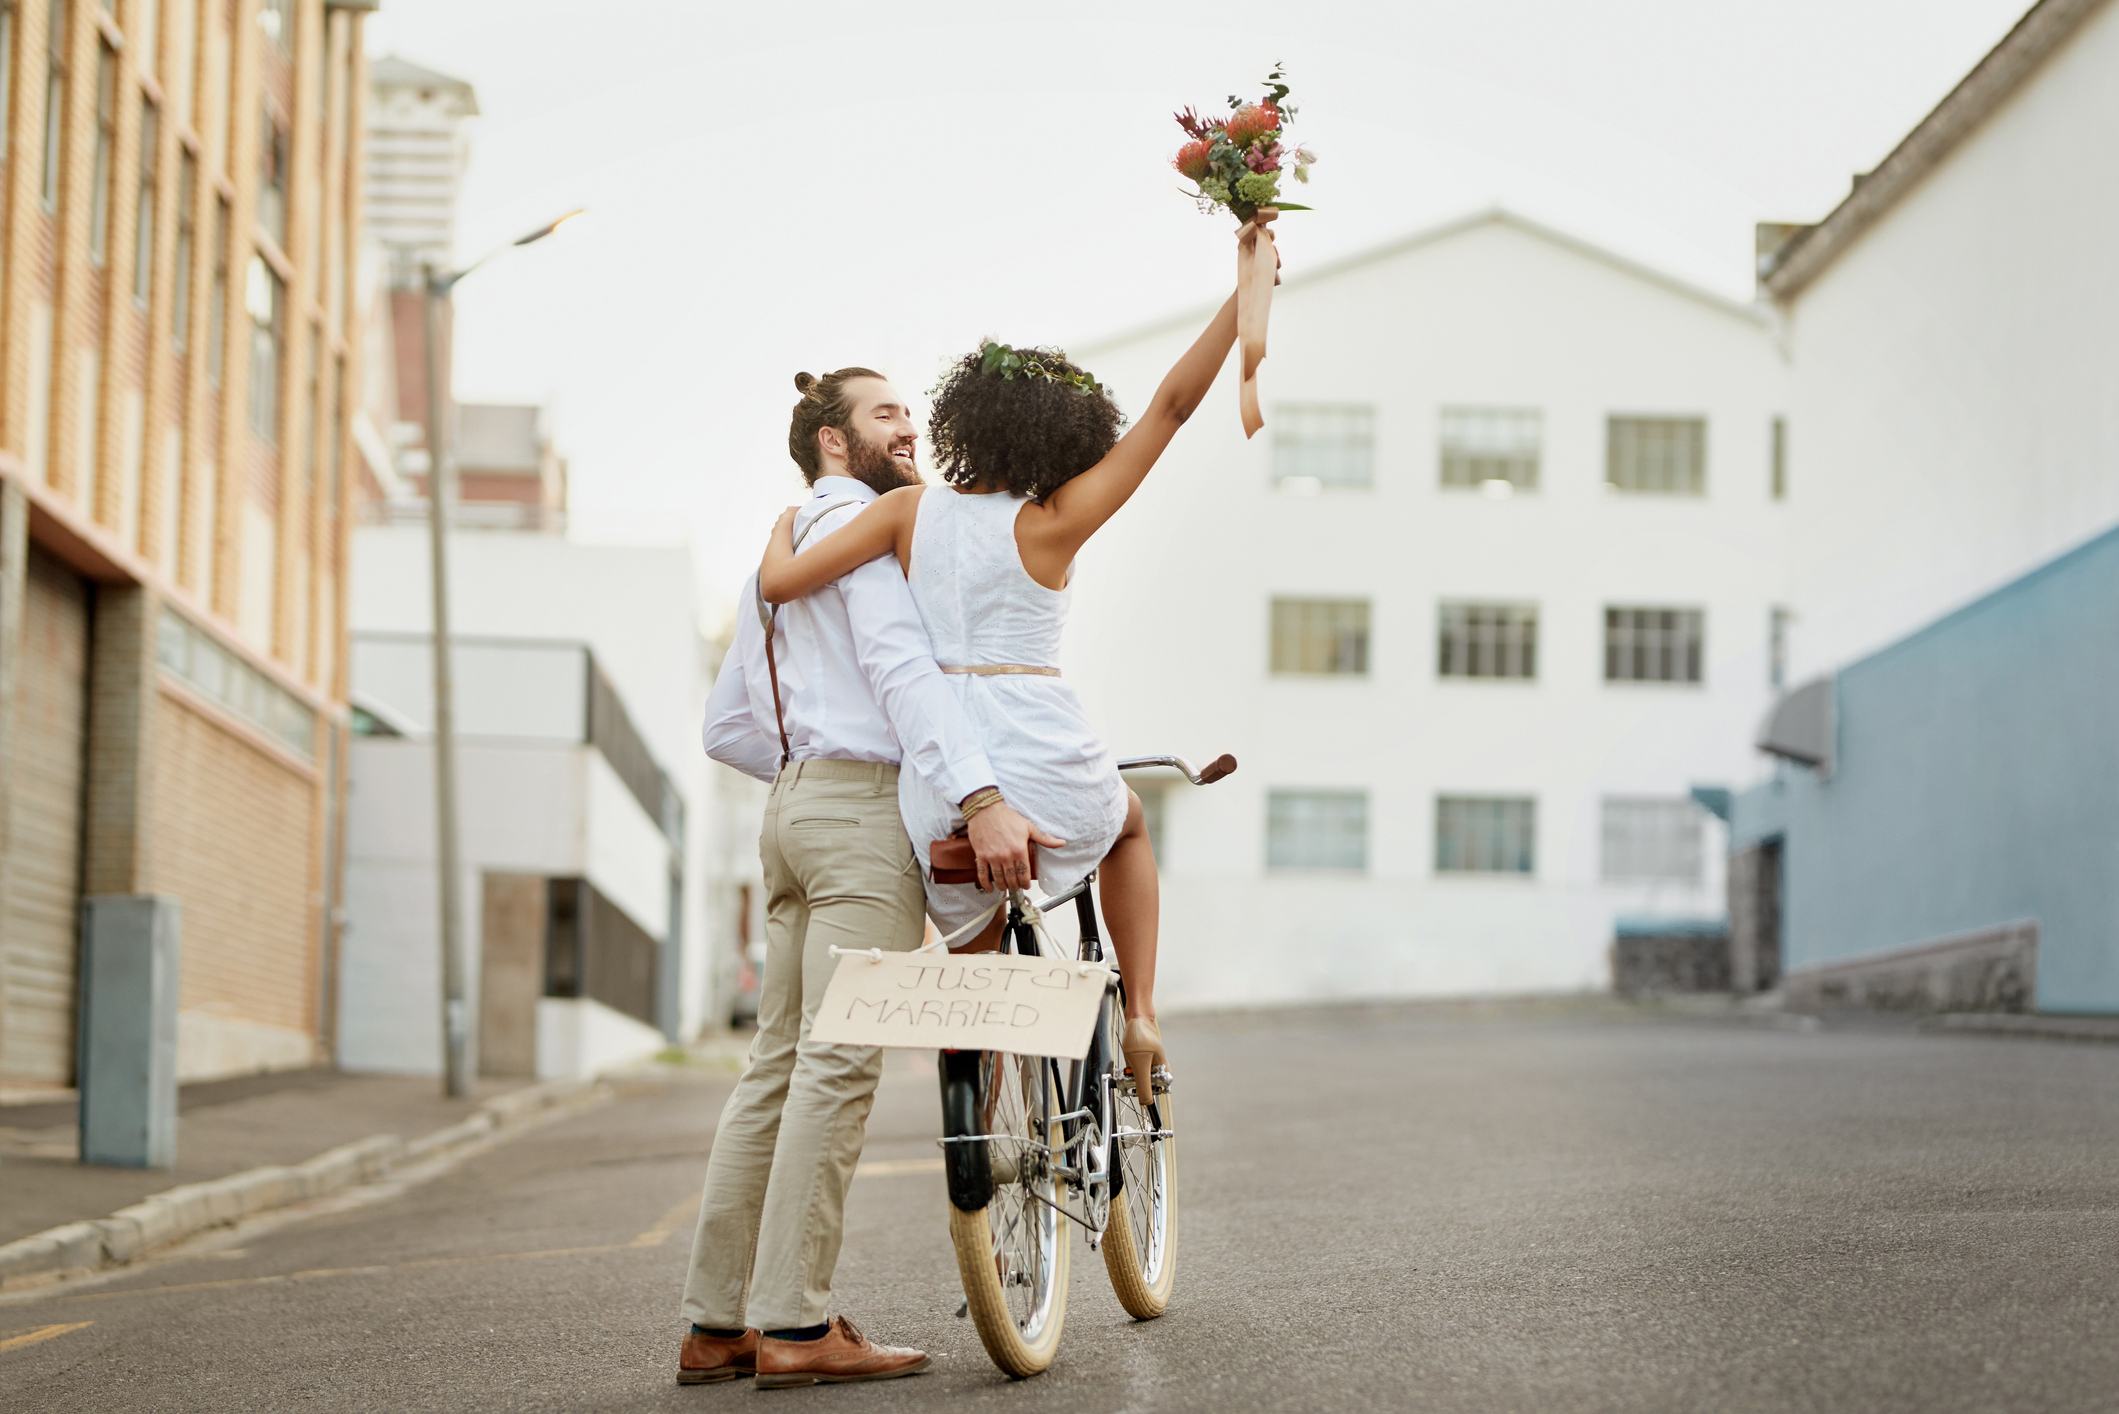 A happy couple embracing as the woman holds up a bouquet